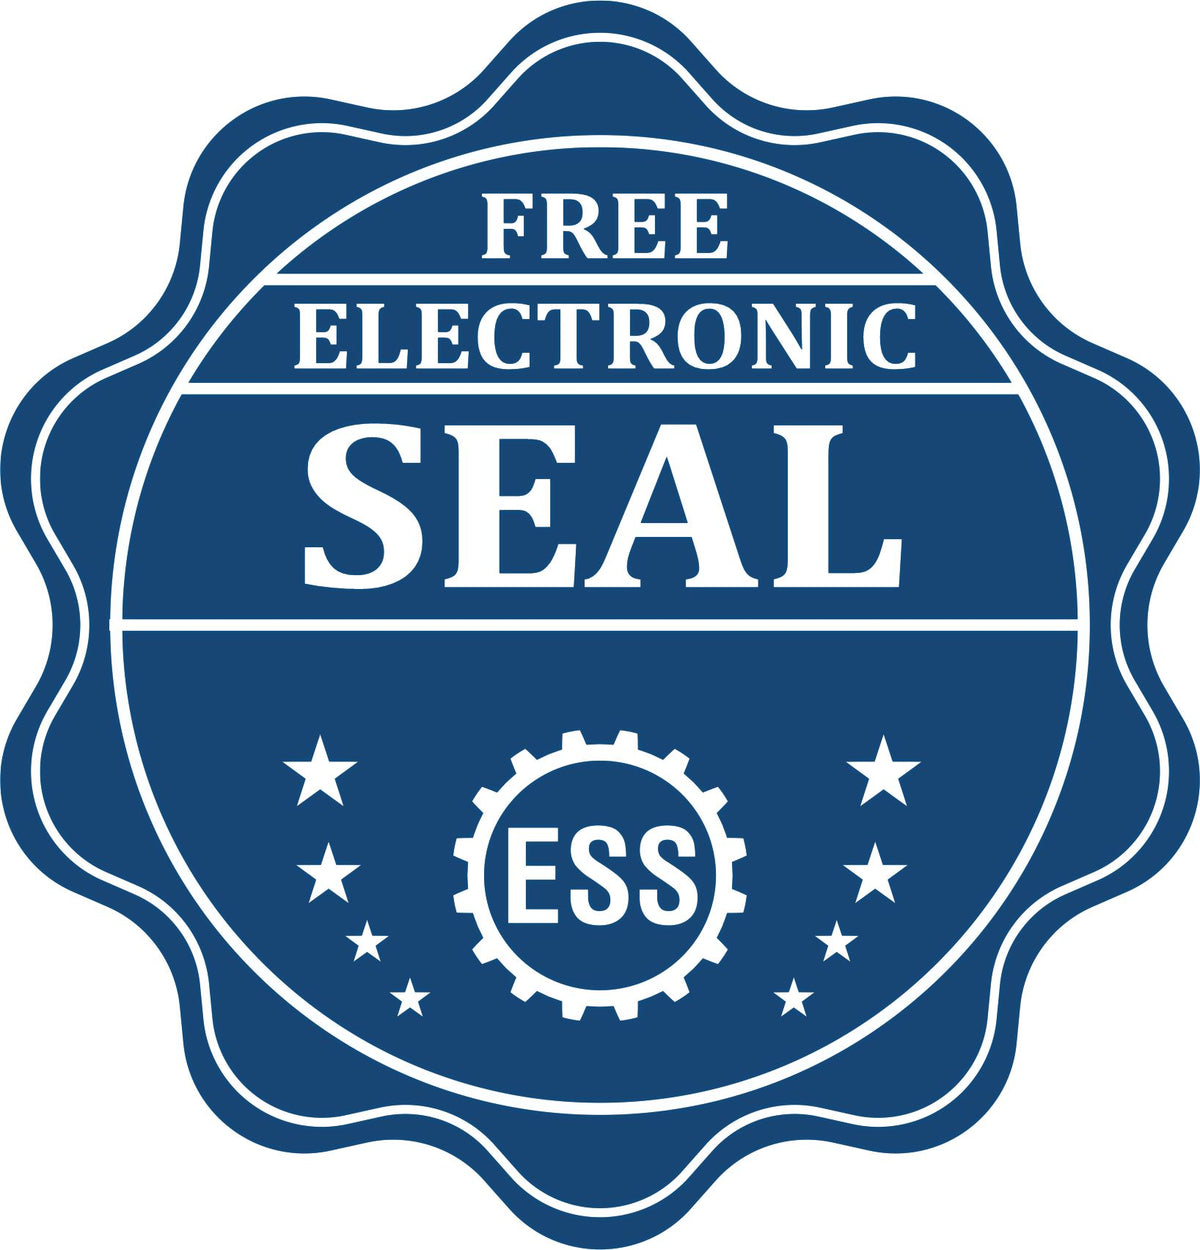 A badge showing a free electronic seal for the Premium MaxLight Pre-Inked Texas Engineering Stamp with stars and the ESS gear on the emblem.